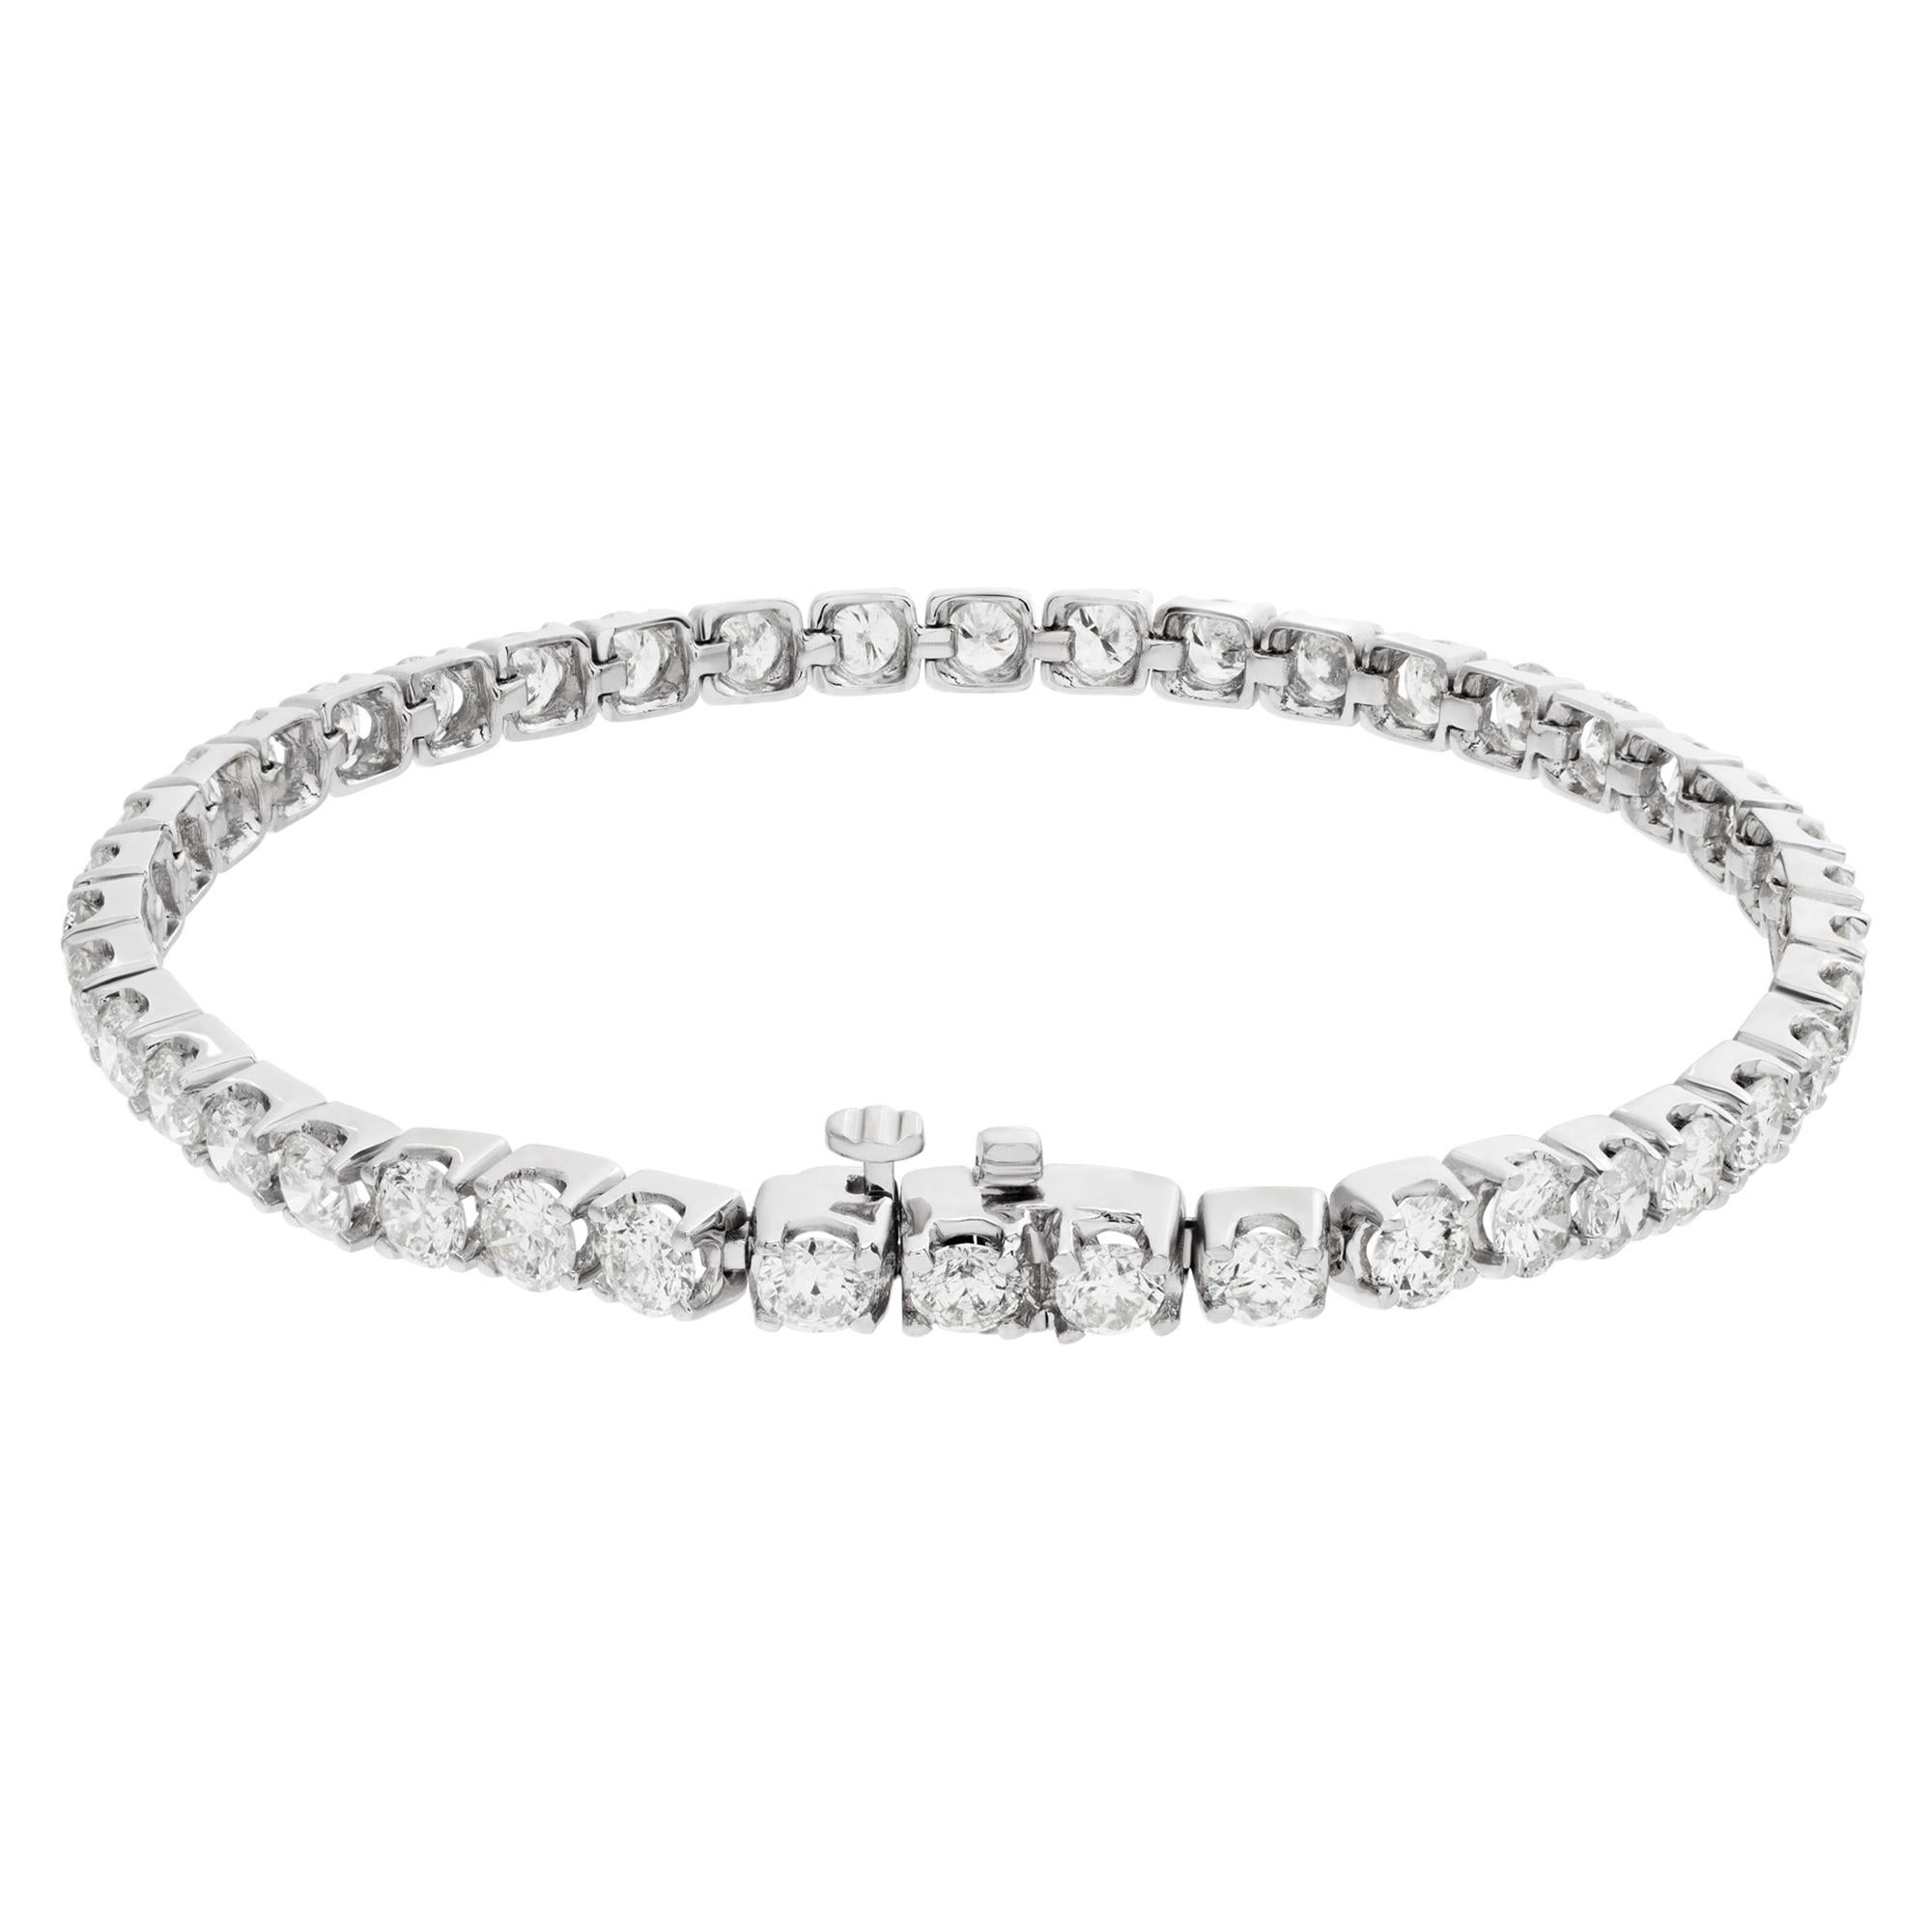 Line Diamond Bracelet with 8.09 Carat Full Cut Round Diamonds Set In Excellent Condition For Sale In Surfside, FL